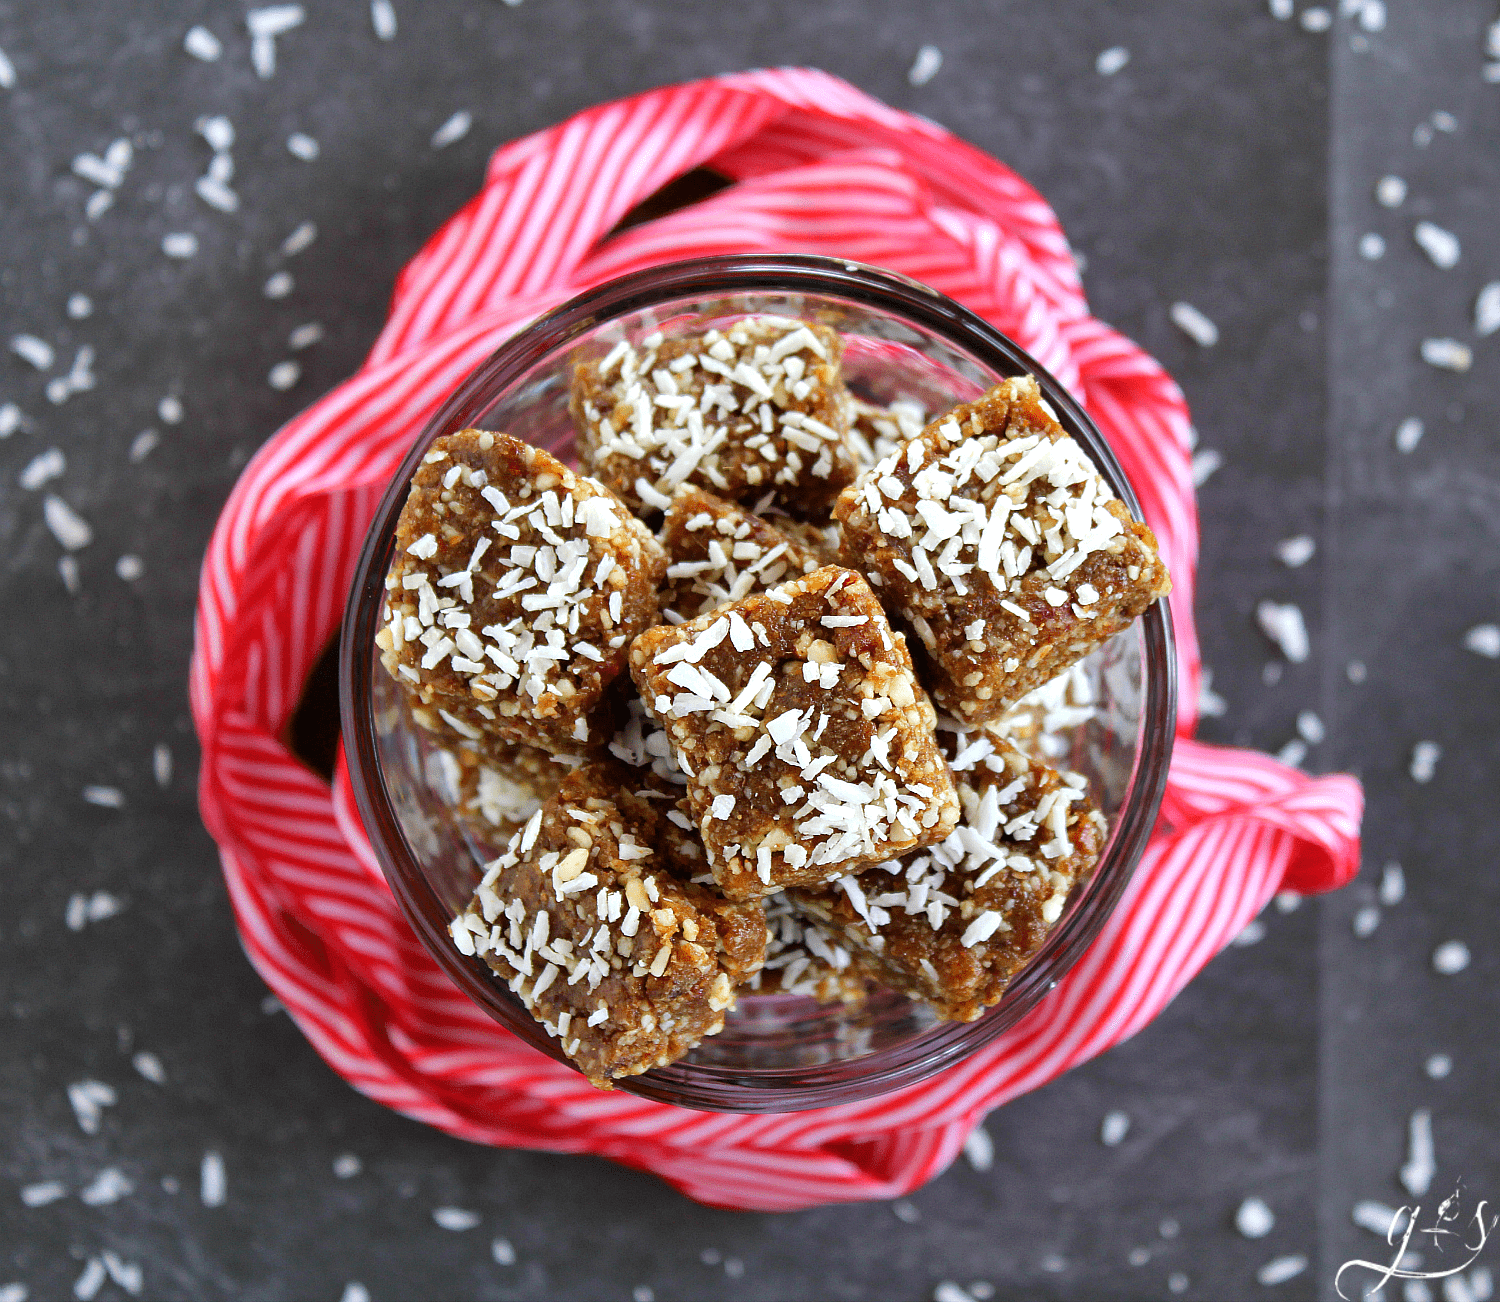 6 Ingredient Gingerbread Energy Bites | This easy no bake recipe will quickly become your favorite healthy snack especially during the holidays! Gluten-free dates, almonds, coconut, molasses, and pumpkin pie spice combine to create a clean eating, Paleo, 21 Day Fix, and vegan recipe that is perfect for families, kids and adults alike. Look no further for the best low carb Christmas dessert or snack!